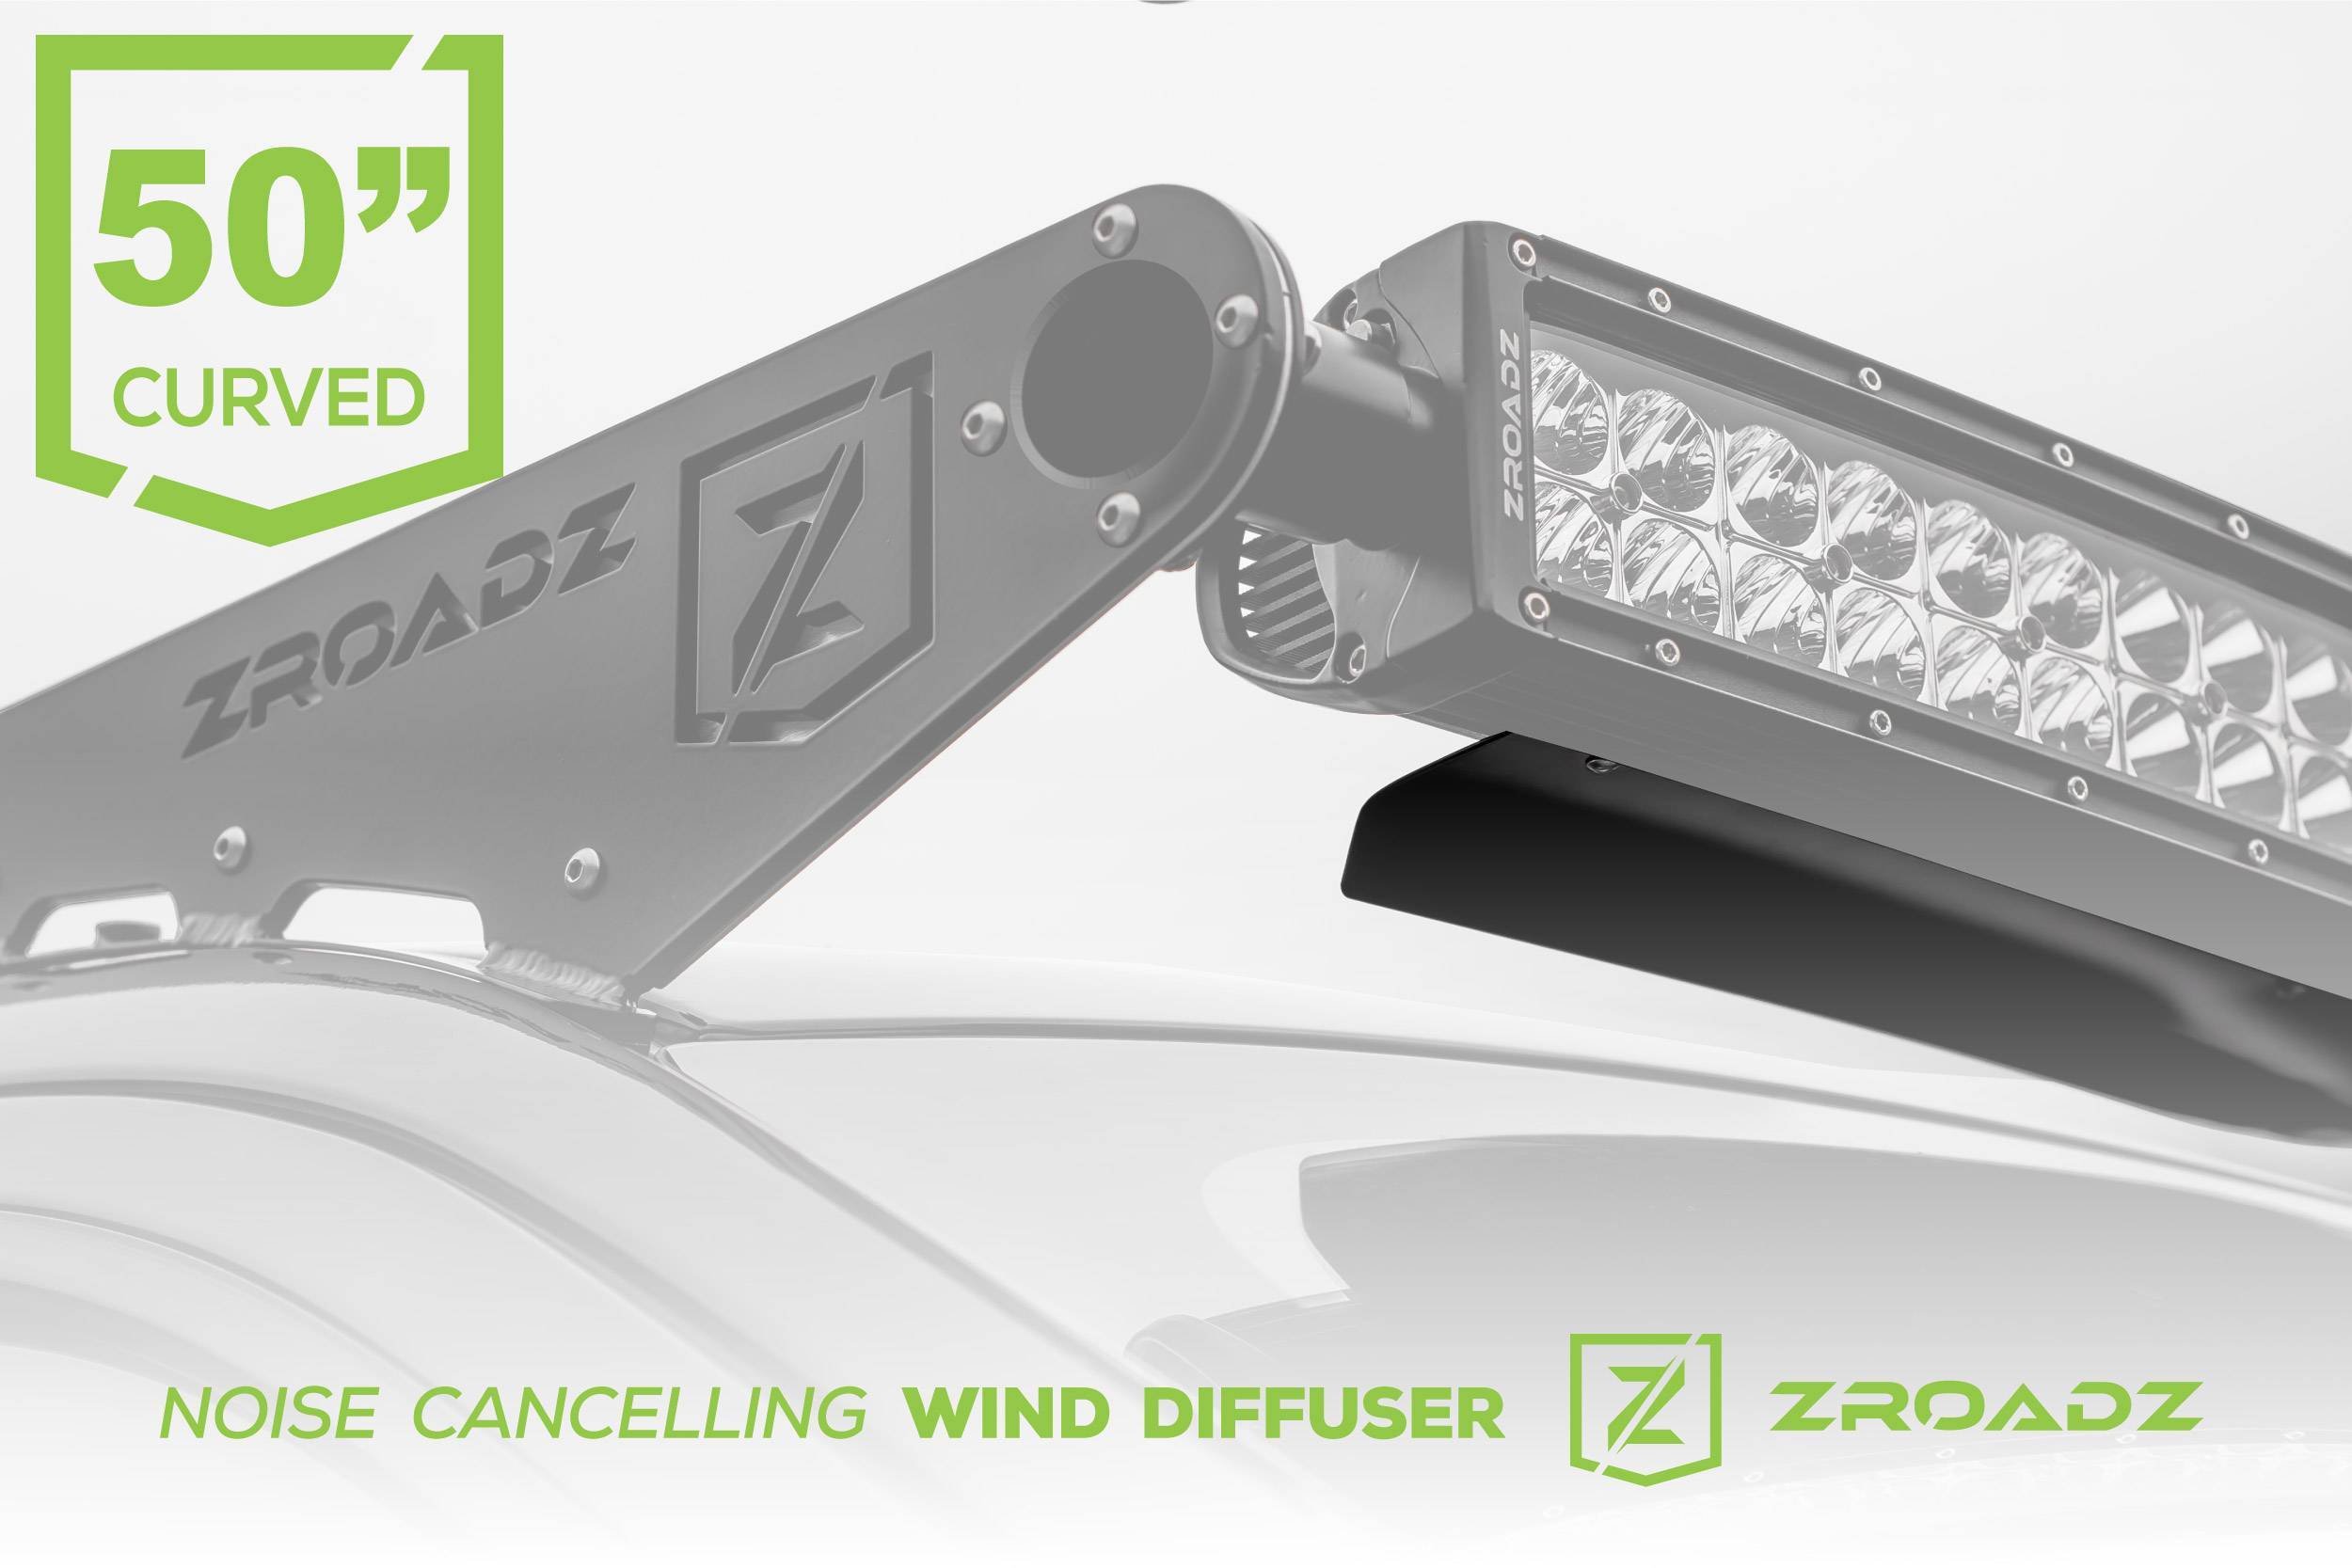 ZROADZ OFF ROAD PRODUCTS - Noise Cancelling Wind Diffuser for 50 Inch Curved LED Light Bar - Part # Z330050C